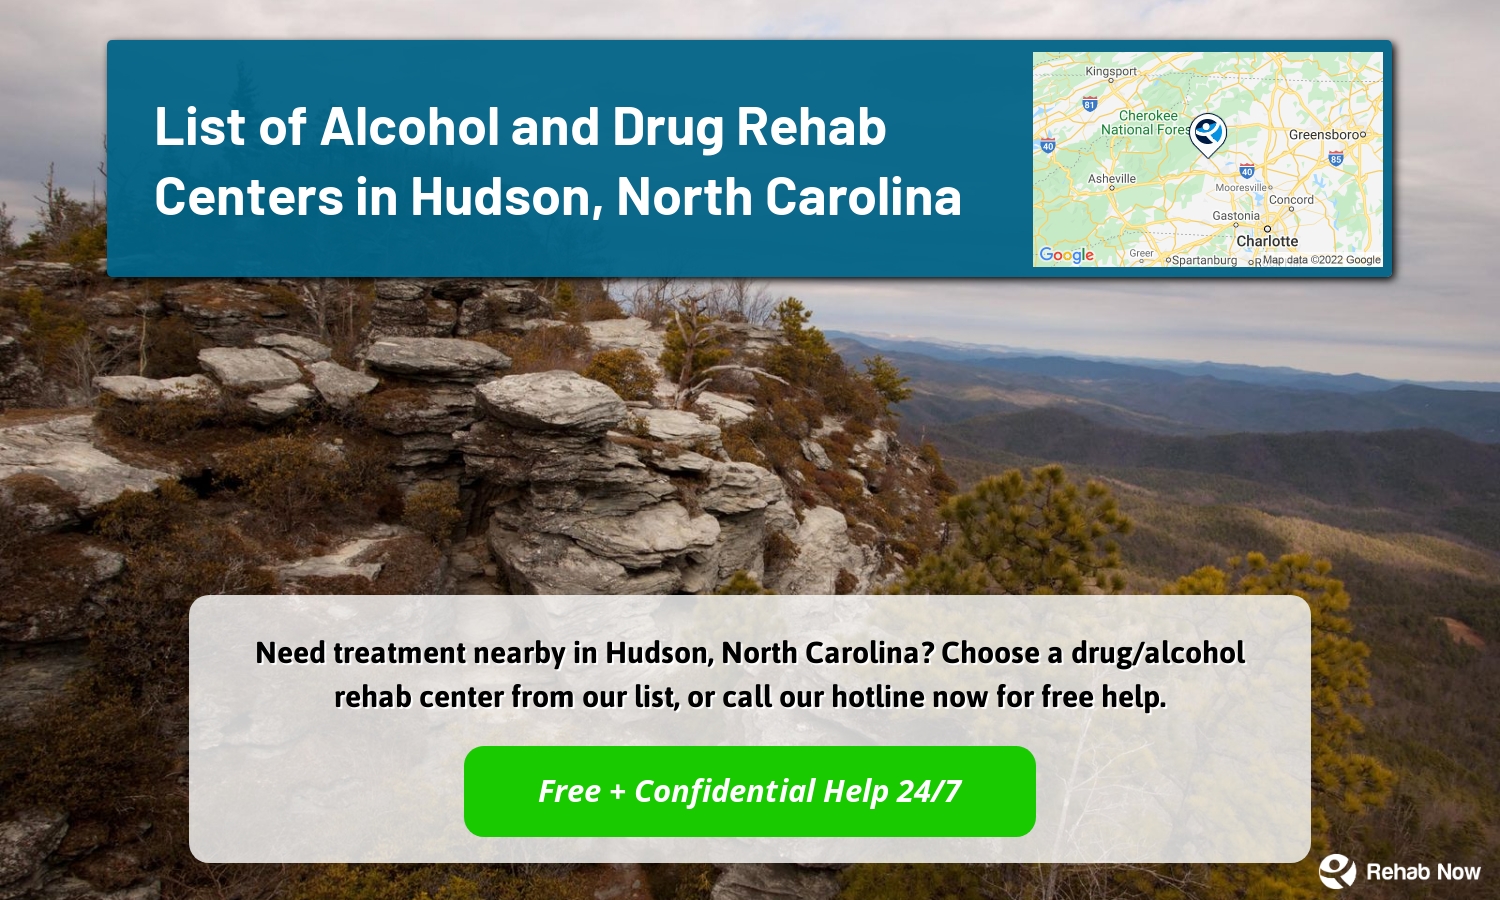 Need treatment nearby in Hudson, North Carolina? Choose a drug/alcohol rehab center from our list, or call our hotline now for free help.